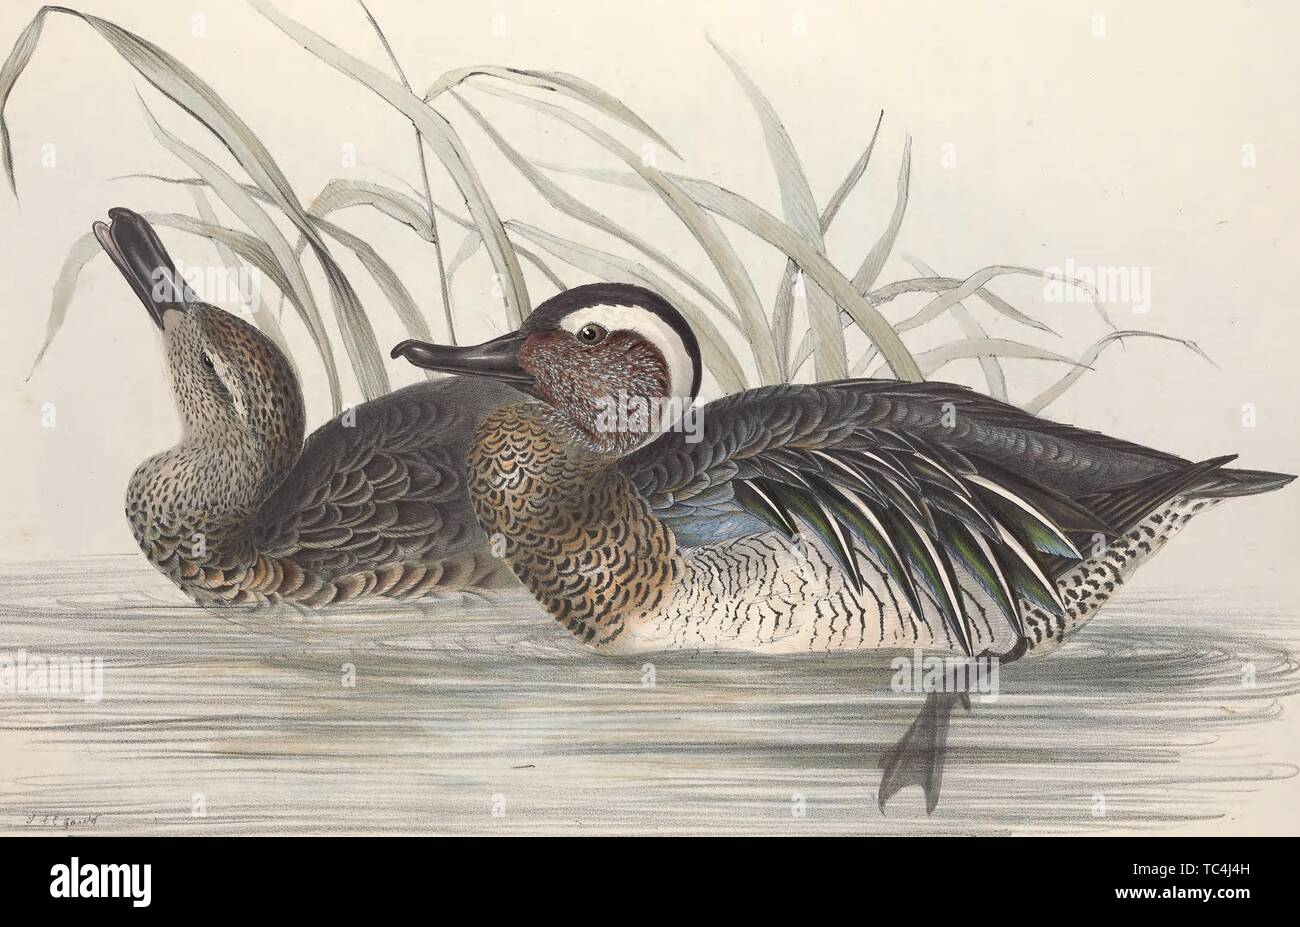 Engraving of the Garganey Teals (Anas querquedula), from the book 'The birds of Europe' by John Gould, 1837. Courtesy Internet Archive. () Stock Photo